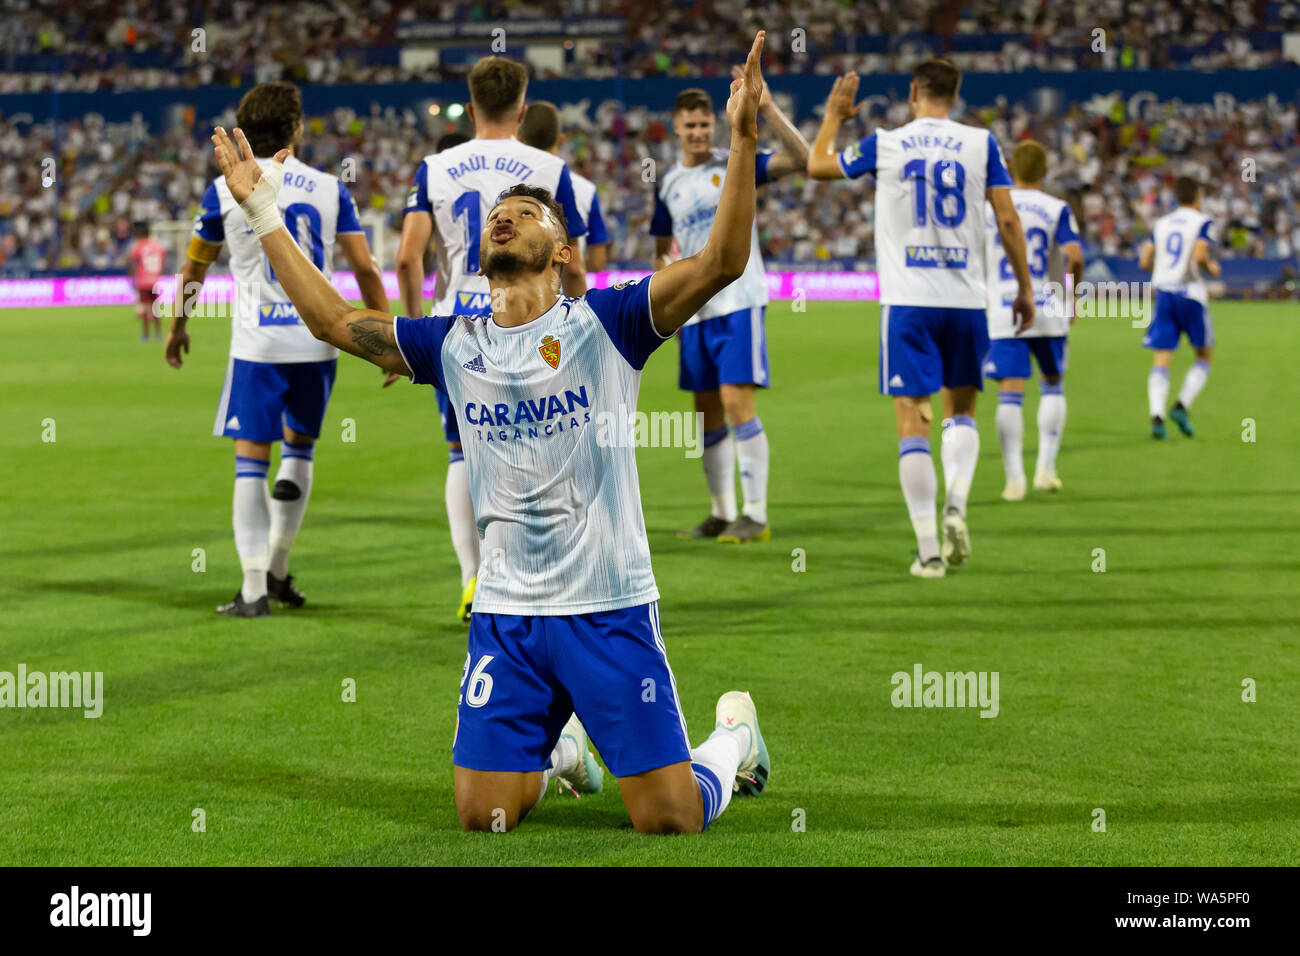 Zaragoza, Spain. 17th Aug, 2019. Luis Suarez of Real Zaragoza (26) celebrates after scoring his team's first goal during the Liga match between Real Zaragoza and CD Tenerife. (Photo by Daniel Marzo/Pacific Press) Credit: Pacific Press Agency/Alamy Live News Stock Photo